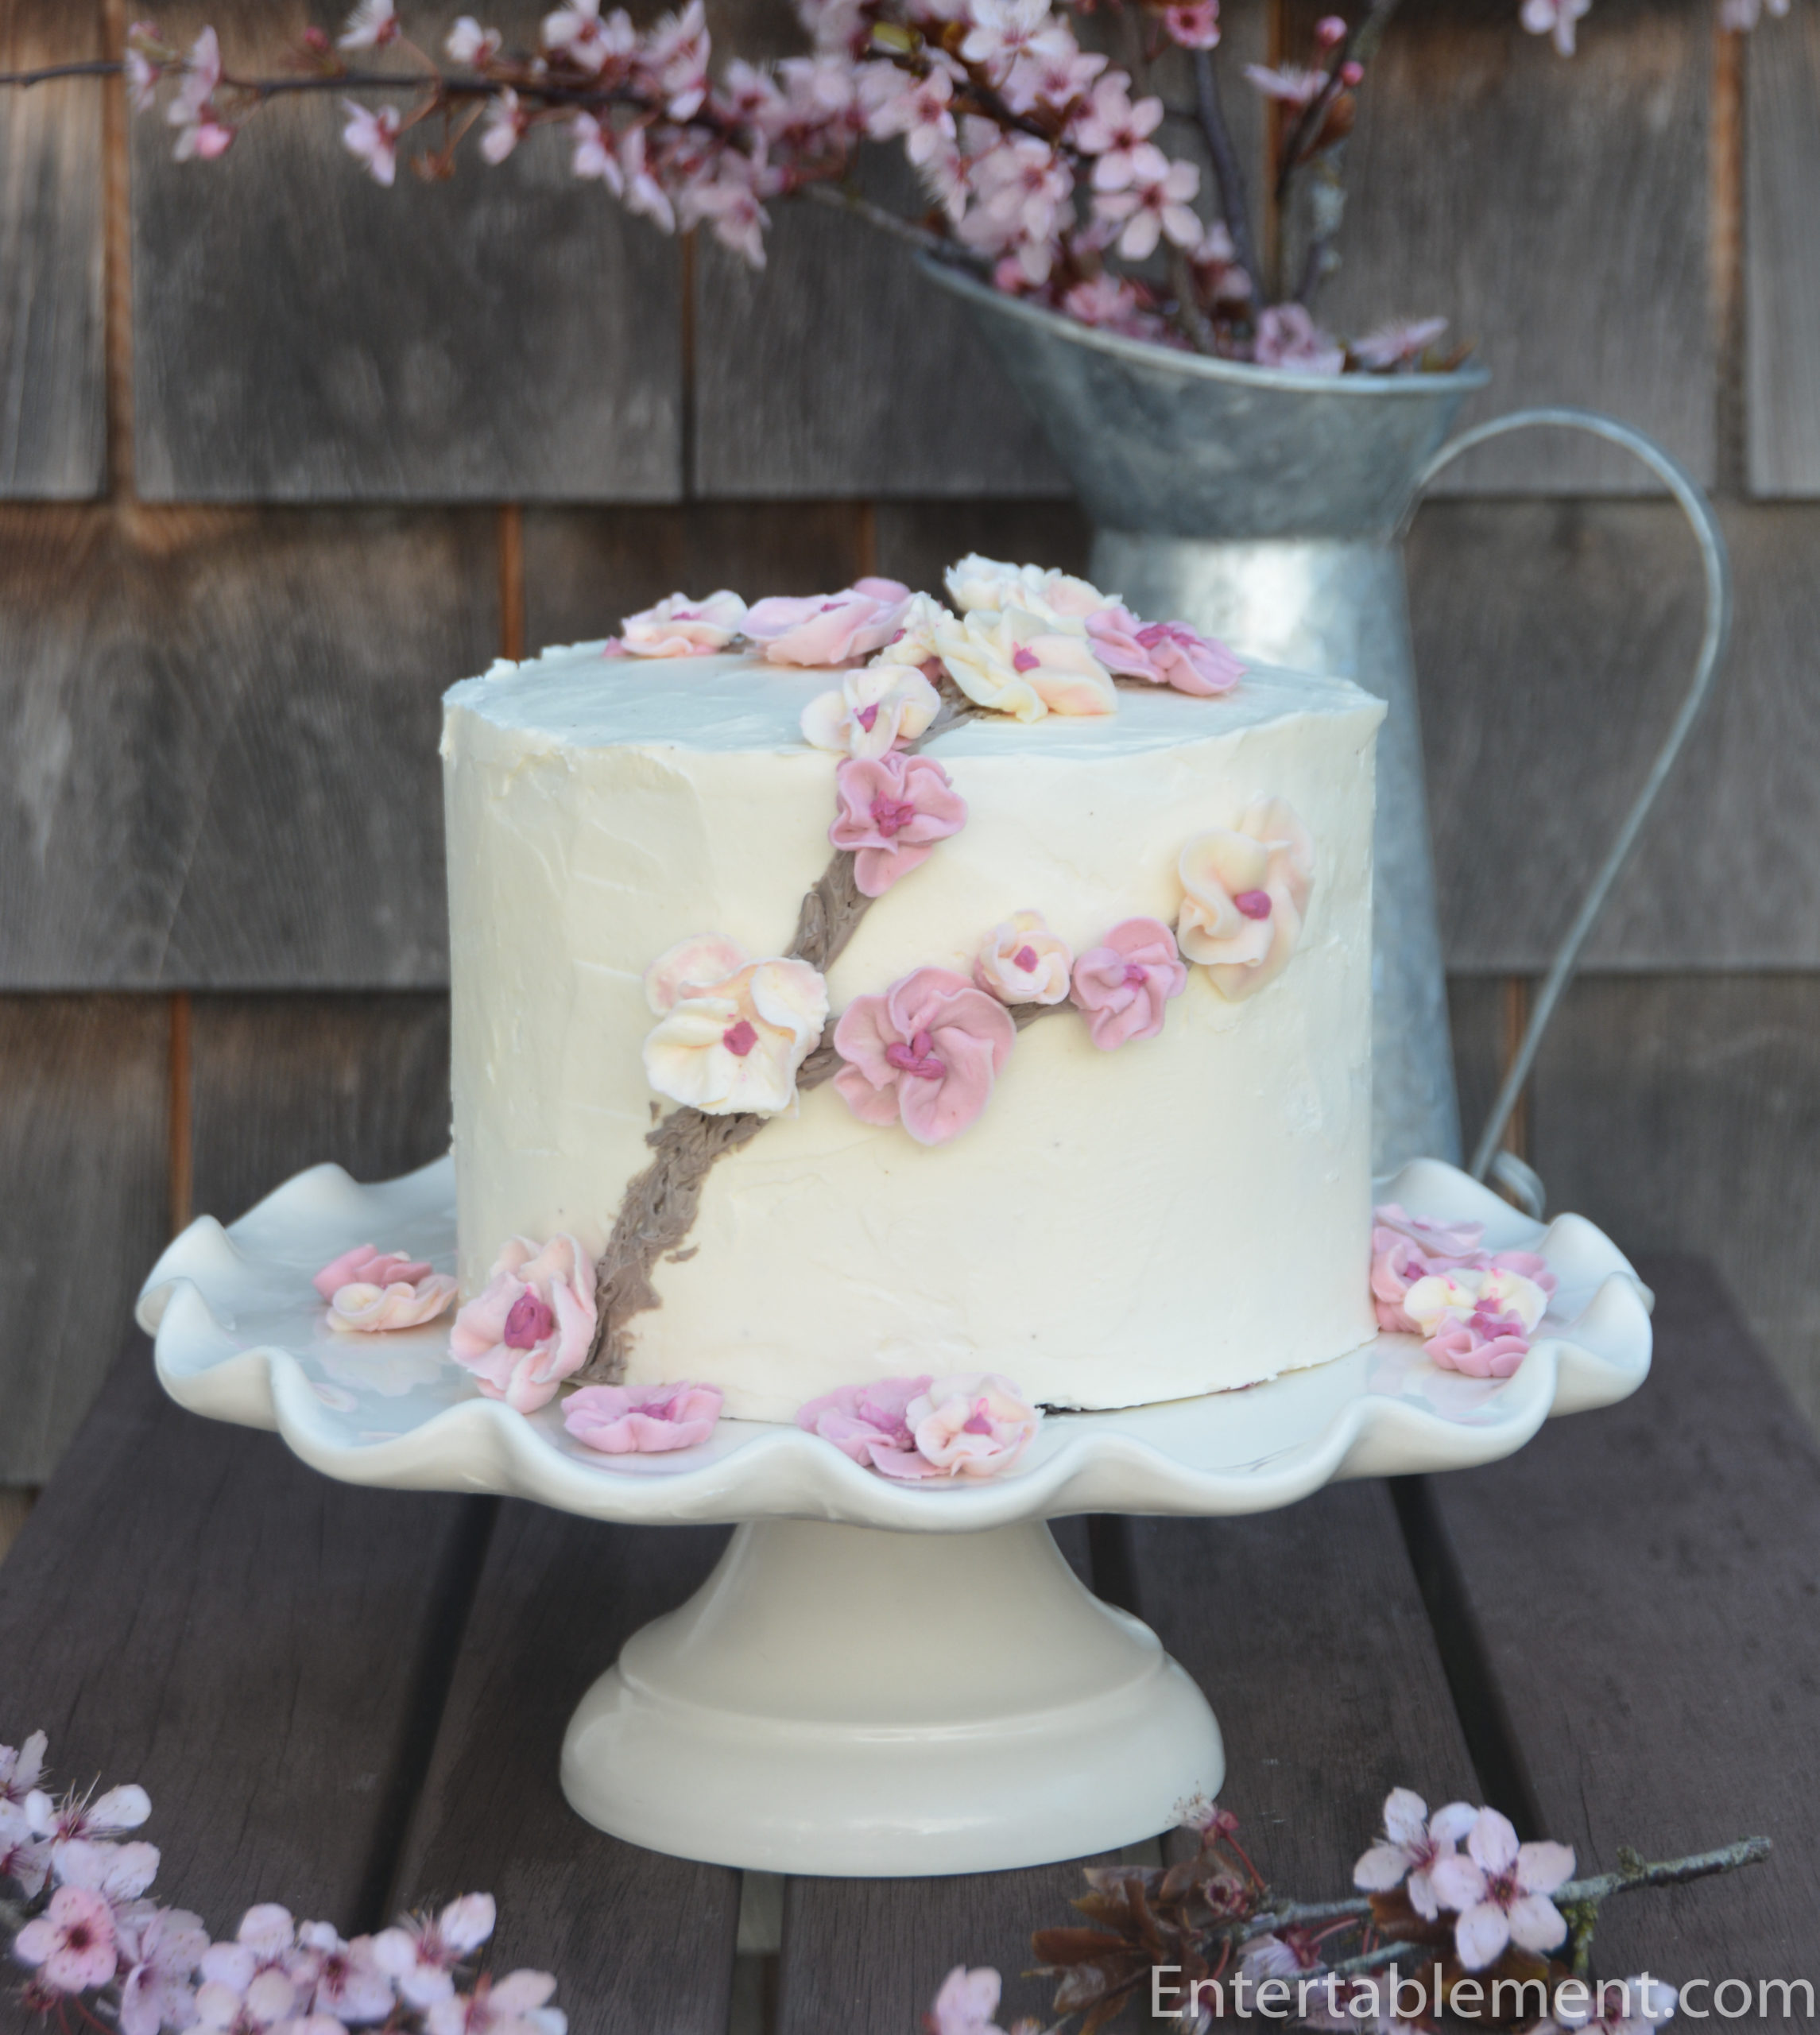 The Createry Shop: Baby Spring Lamb With Cherry Blossom Tree Cake and  Recipe for Not Too Sweet Buttercream Icing